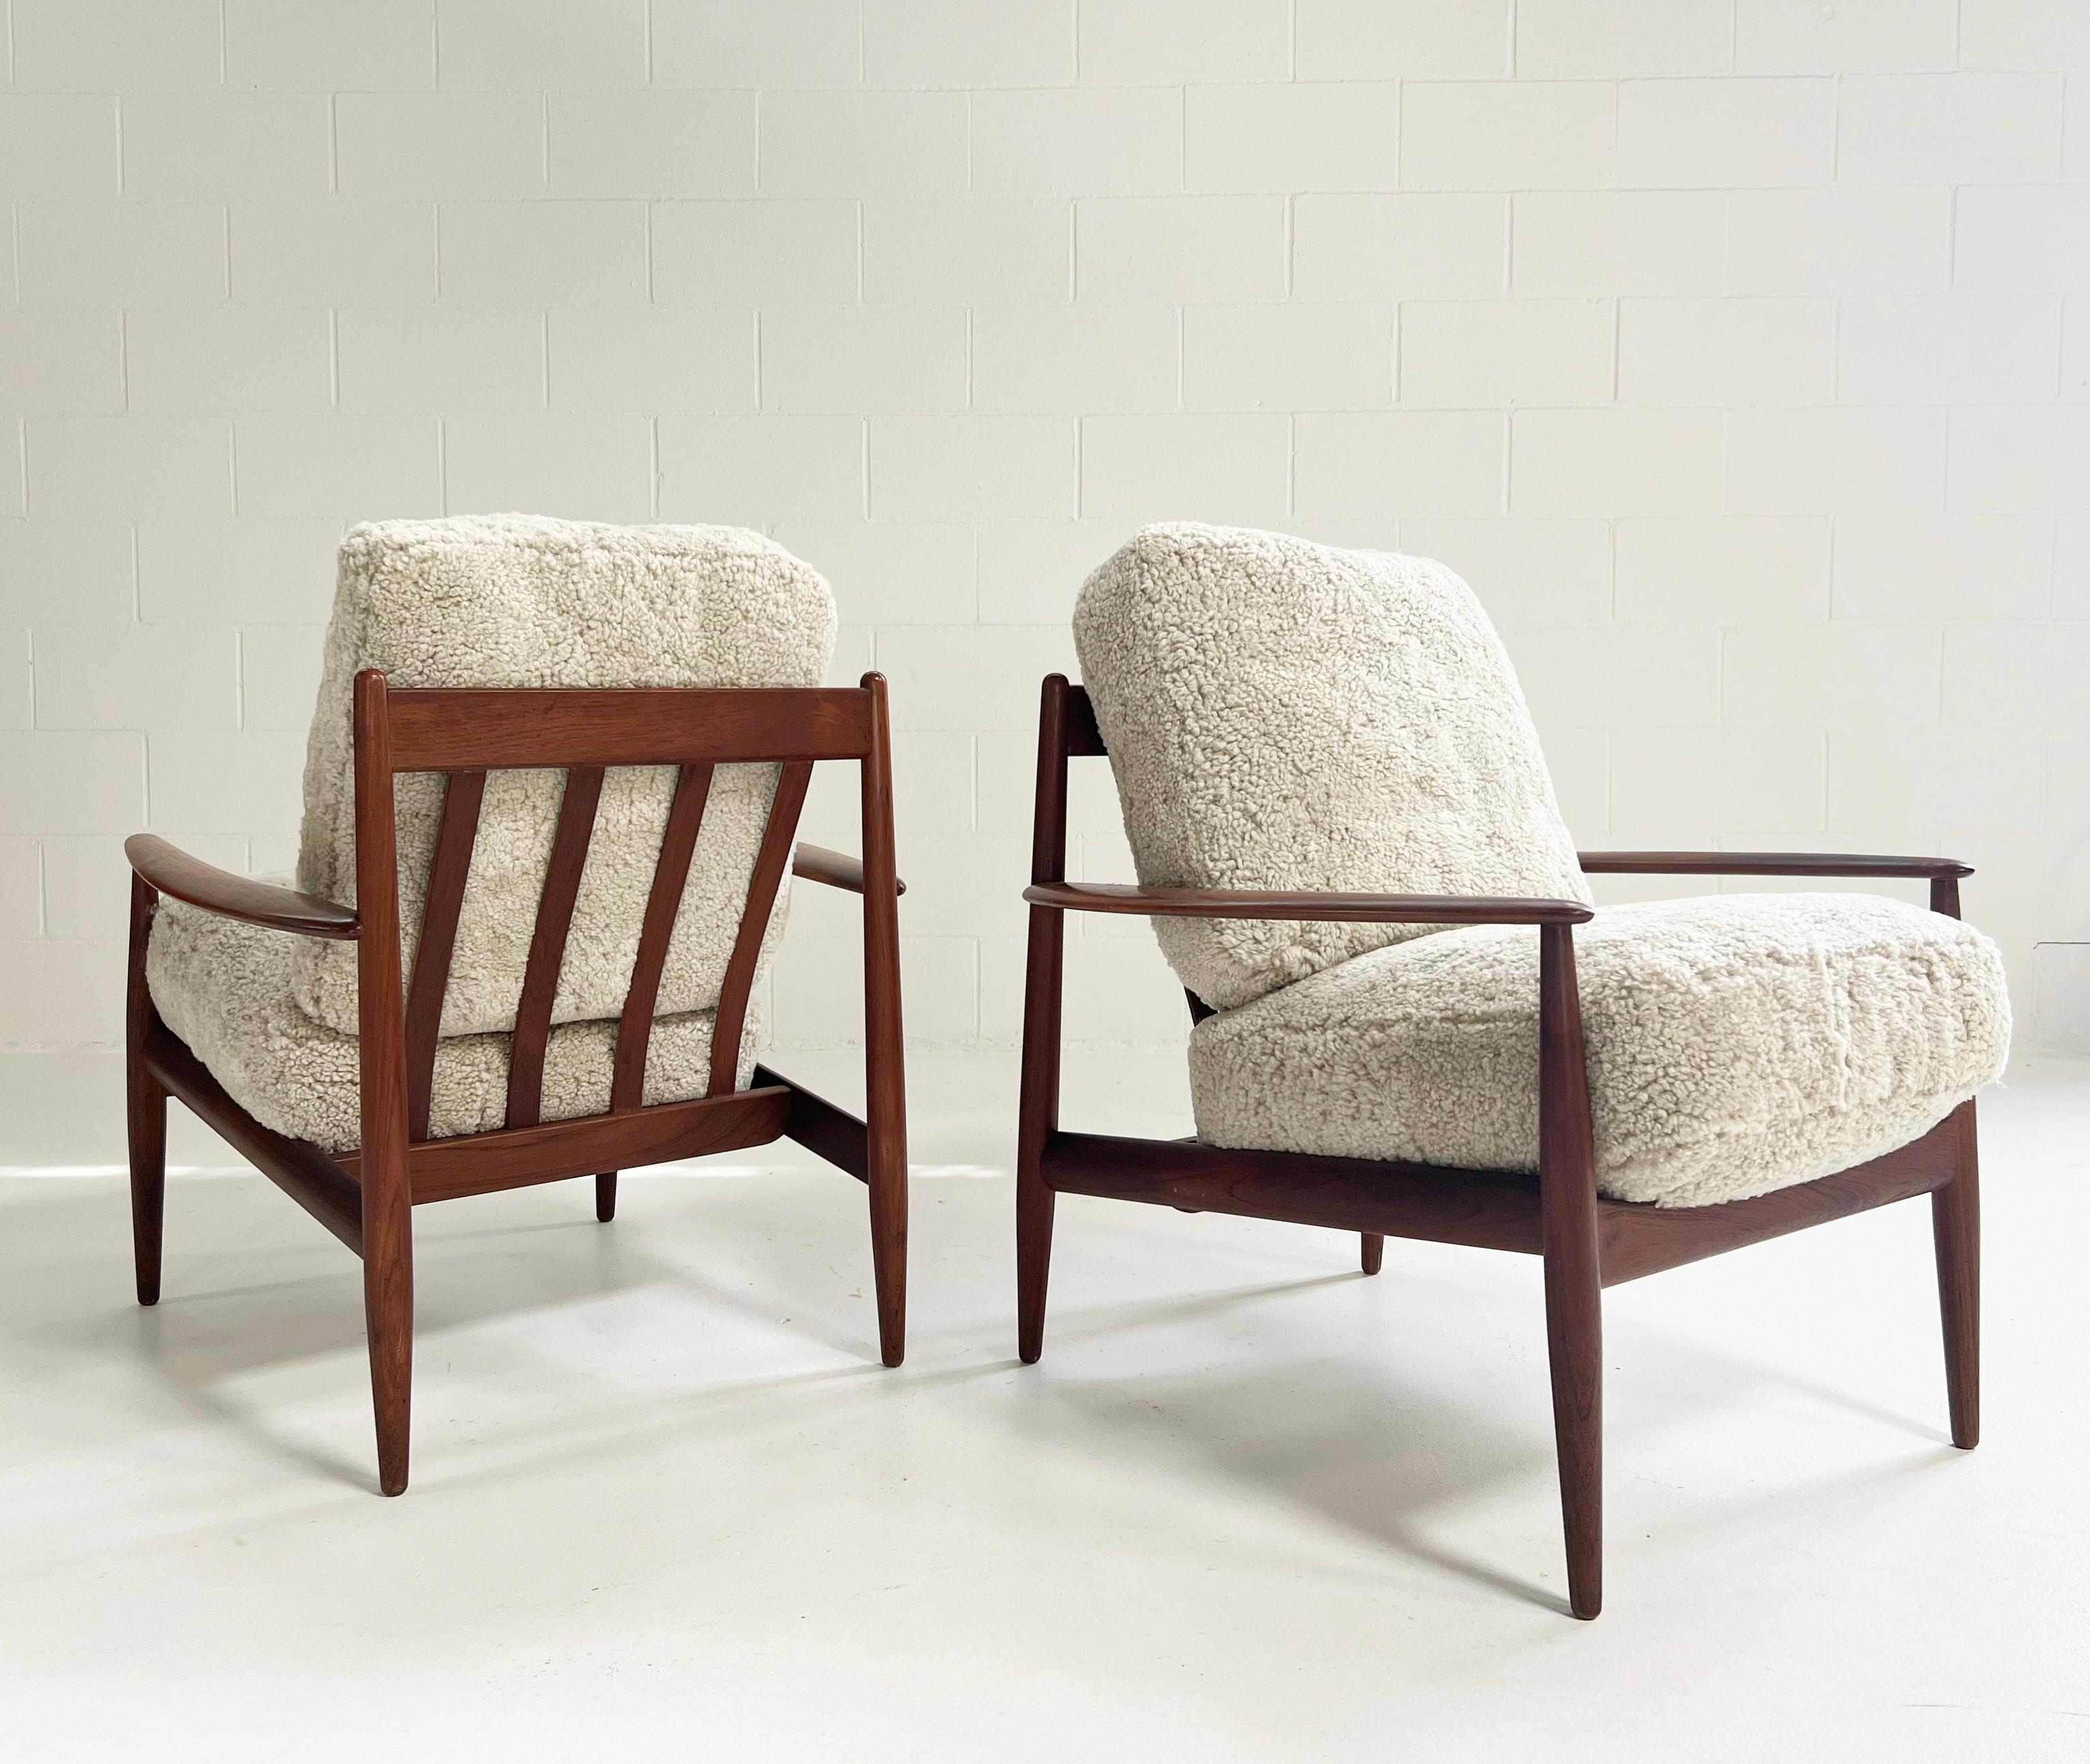 Grete Jalk Model 118 Lounge Chairs in Shearling, Pair 2